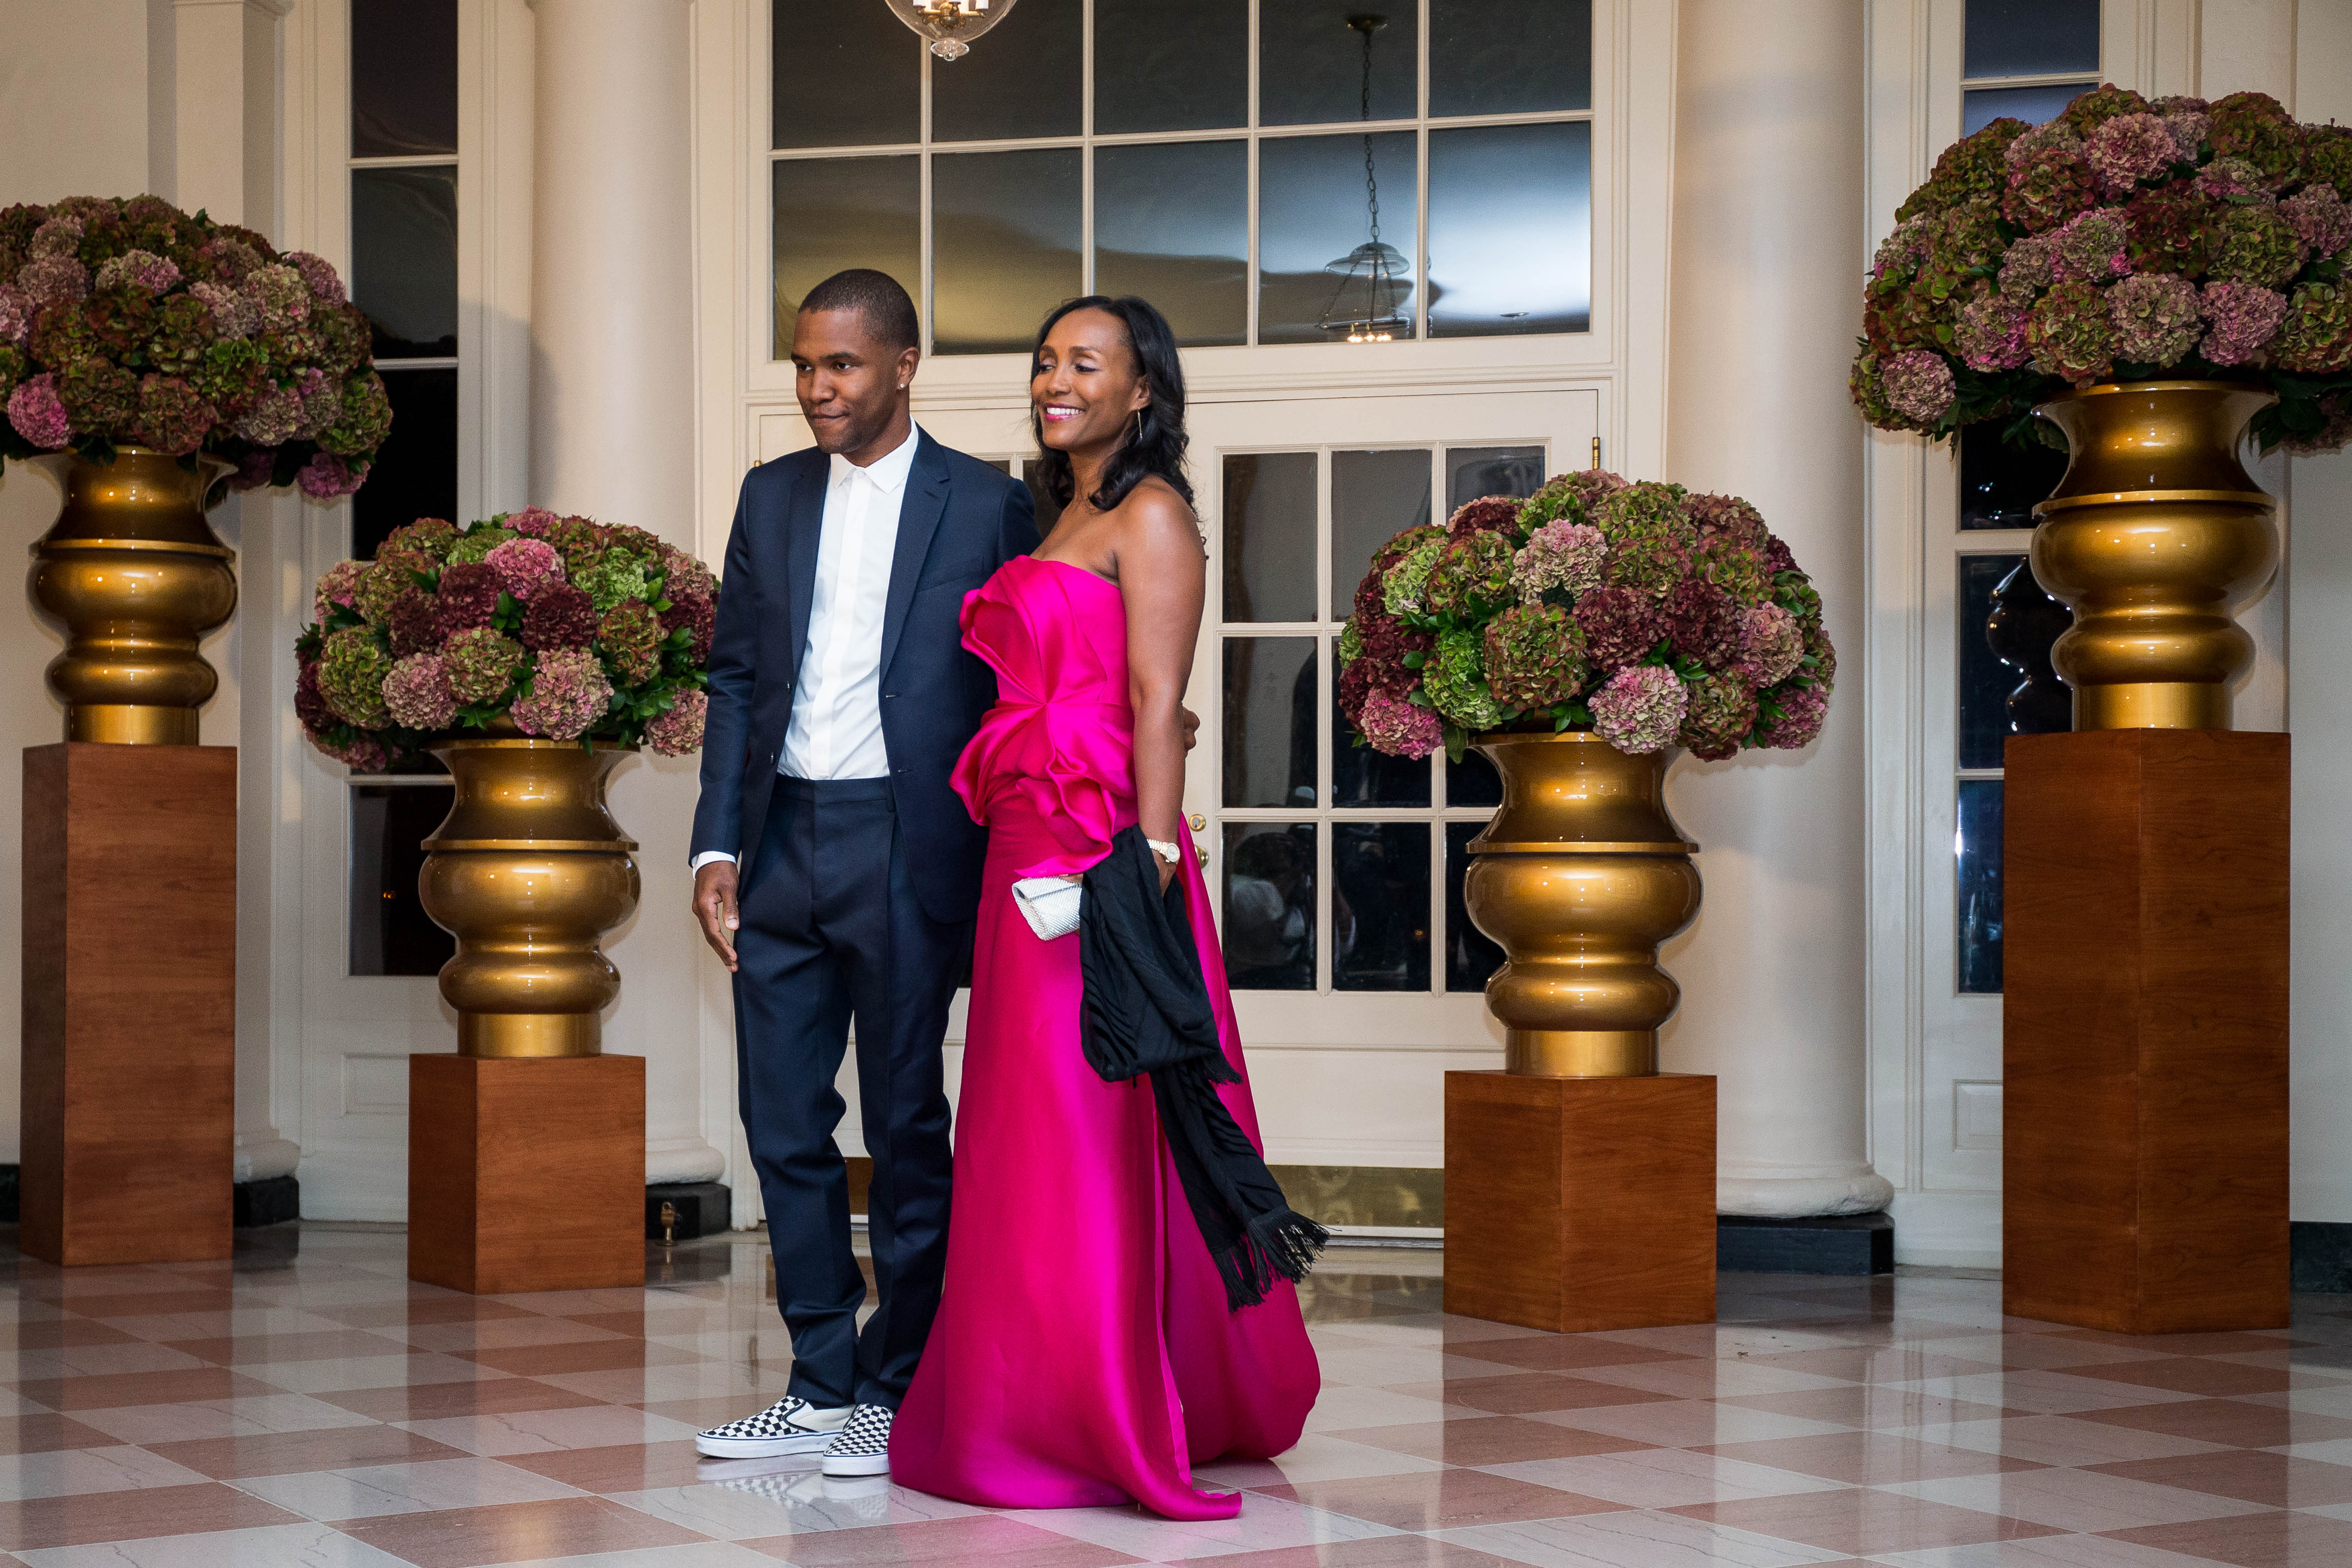 These Moments From The Obama's Last White House State Dinner Will Make You Emotional
